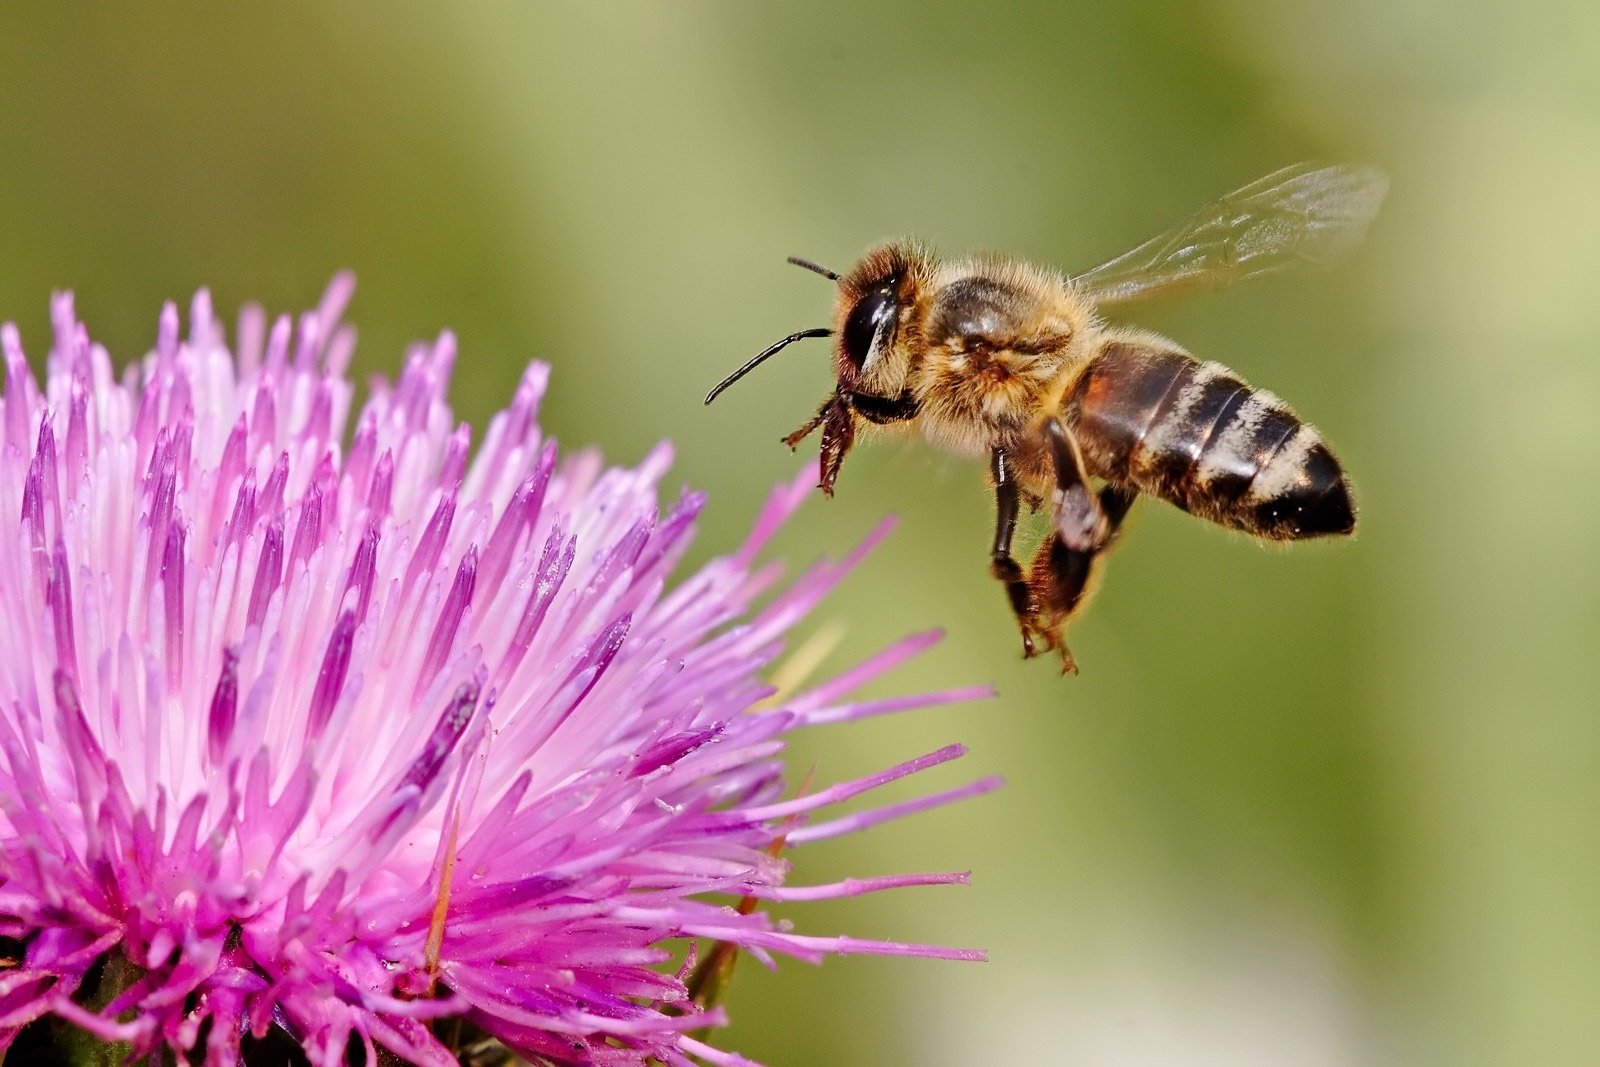 Bees, and experiences to care for the environment Royal Planet shares